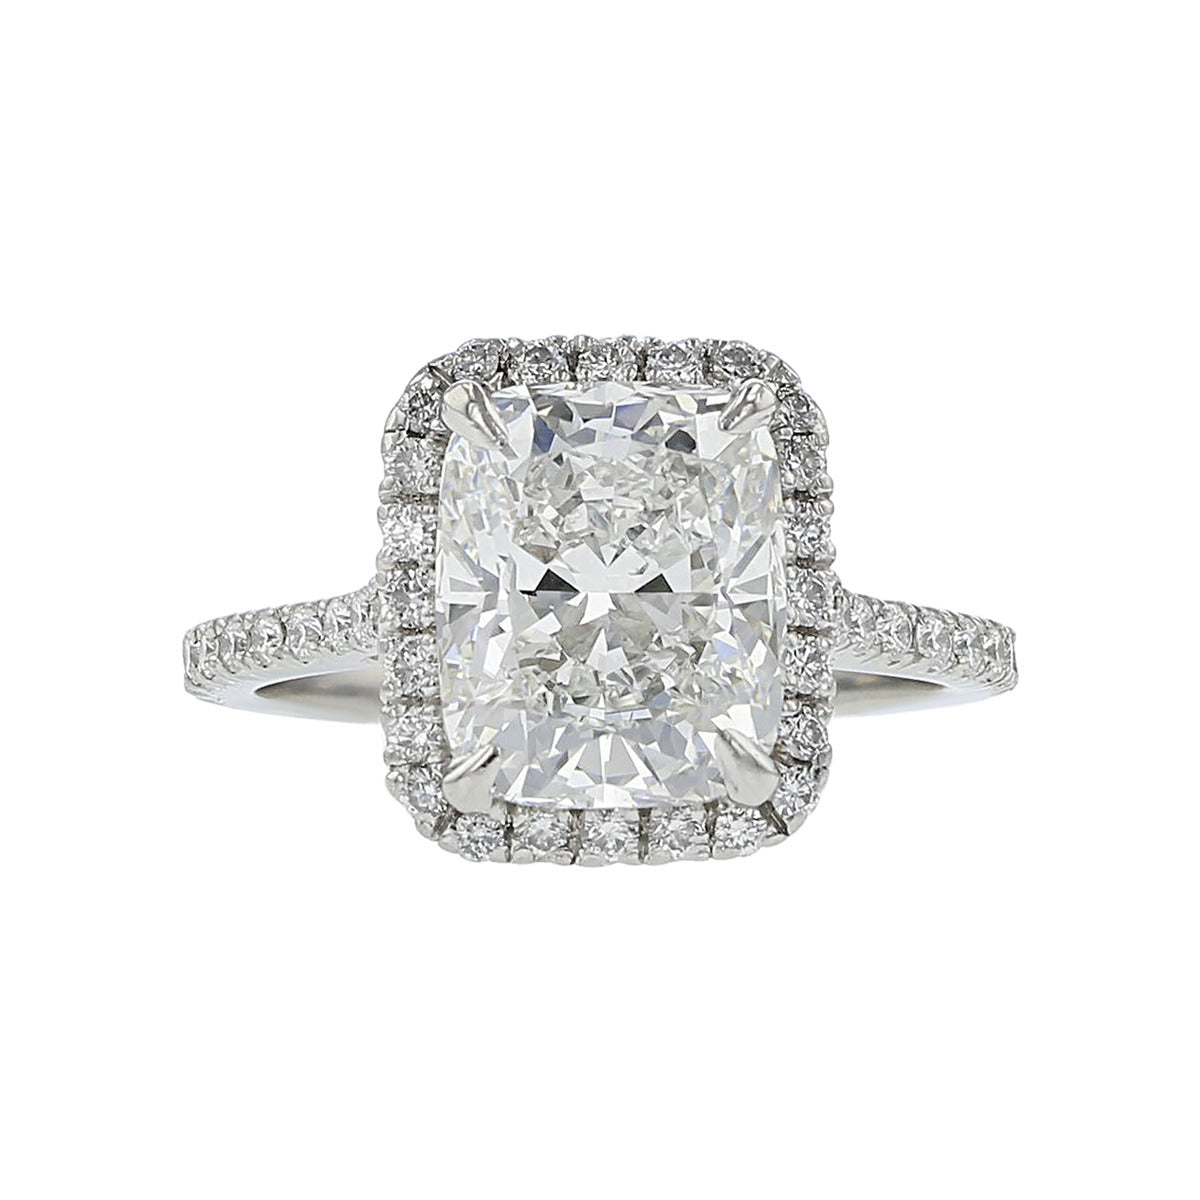 Aubrey - 14K Yellow Gold Double Claw Prong Cushion Diamond Engagement Ring  - Wedding Bands & Co.